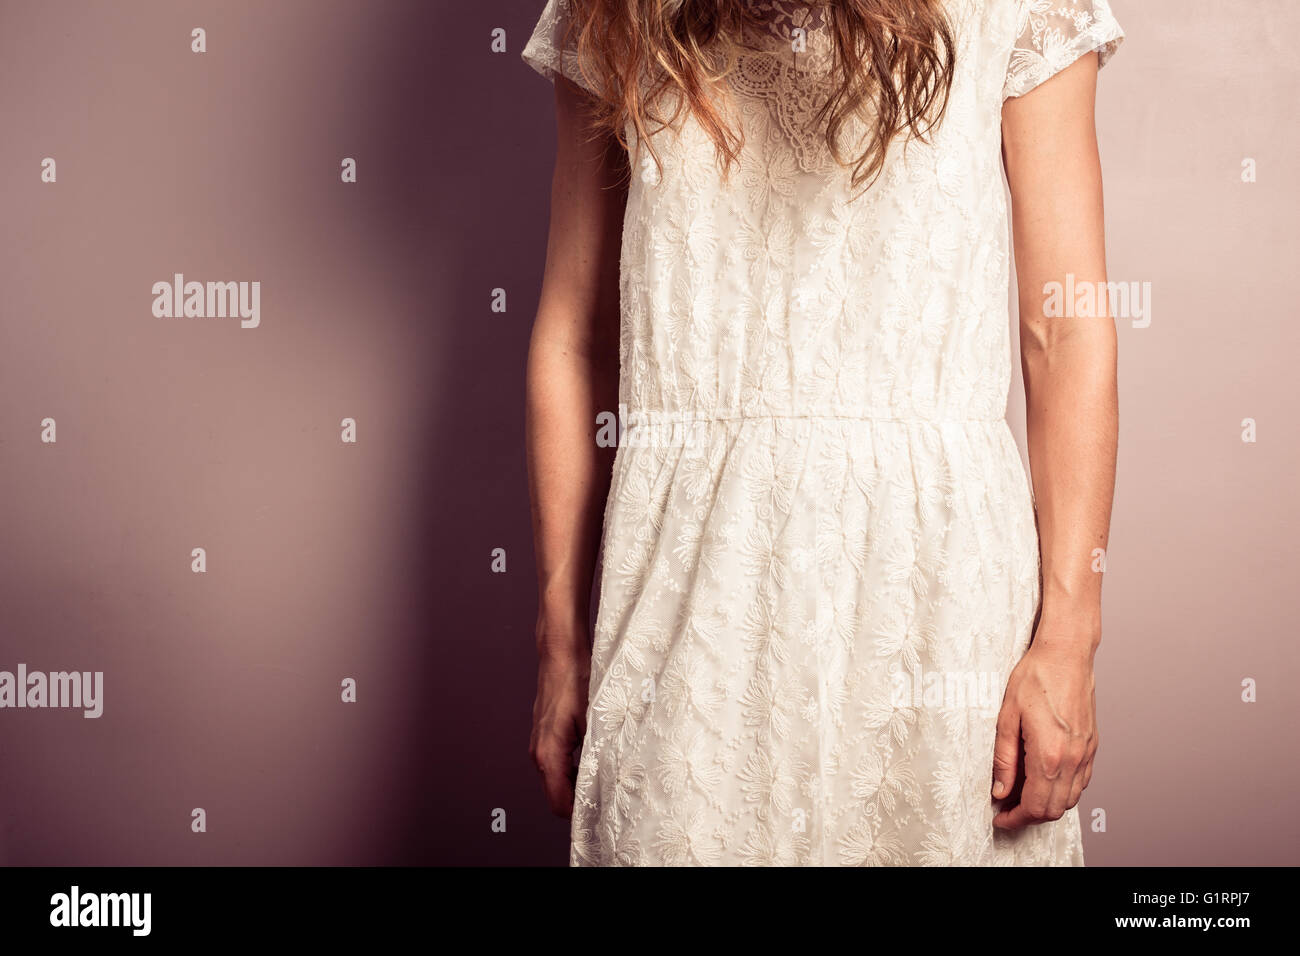 A sad young woman wearing a white dress is standing by a purple wall with her head hanging Stock Photo